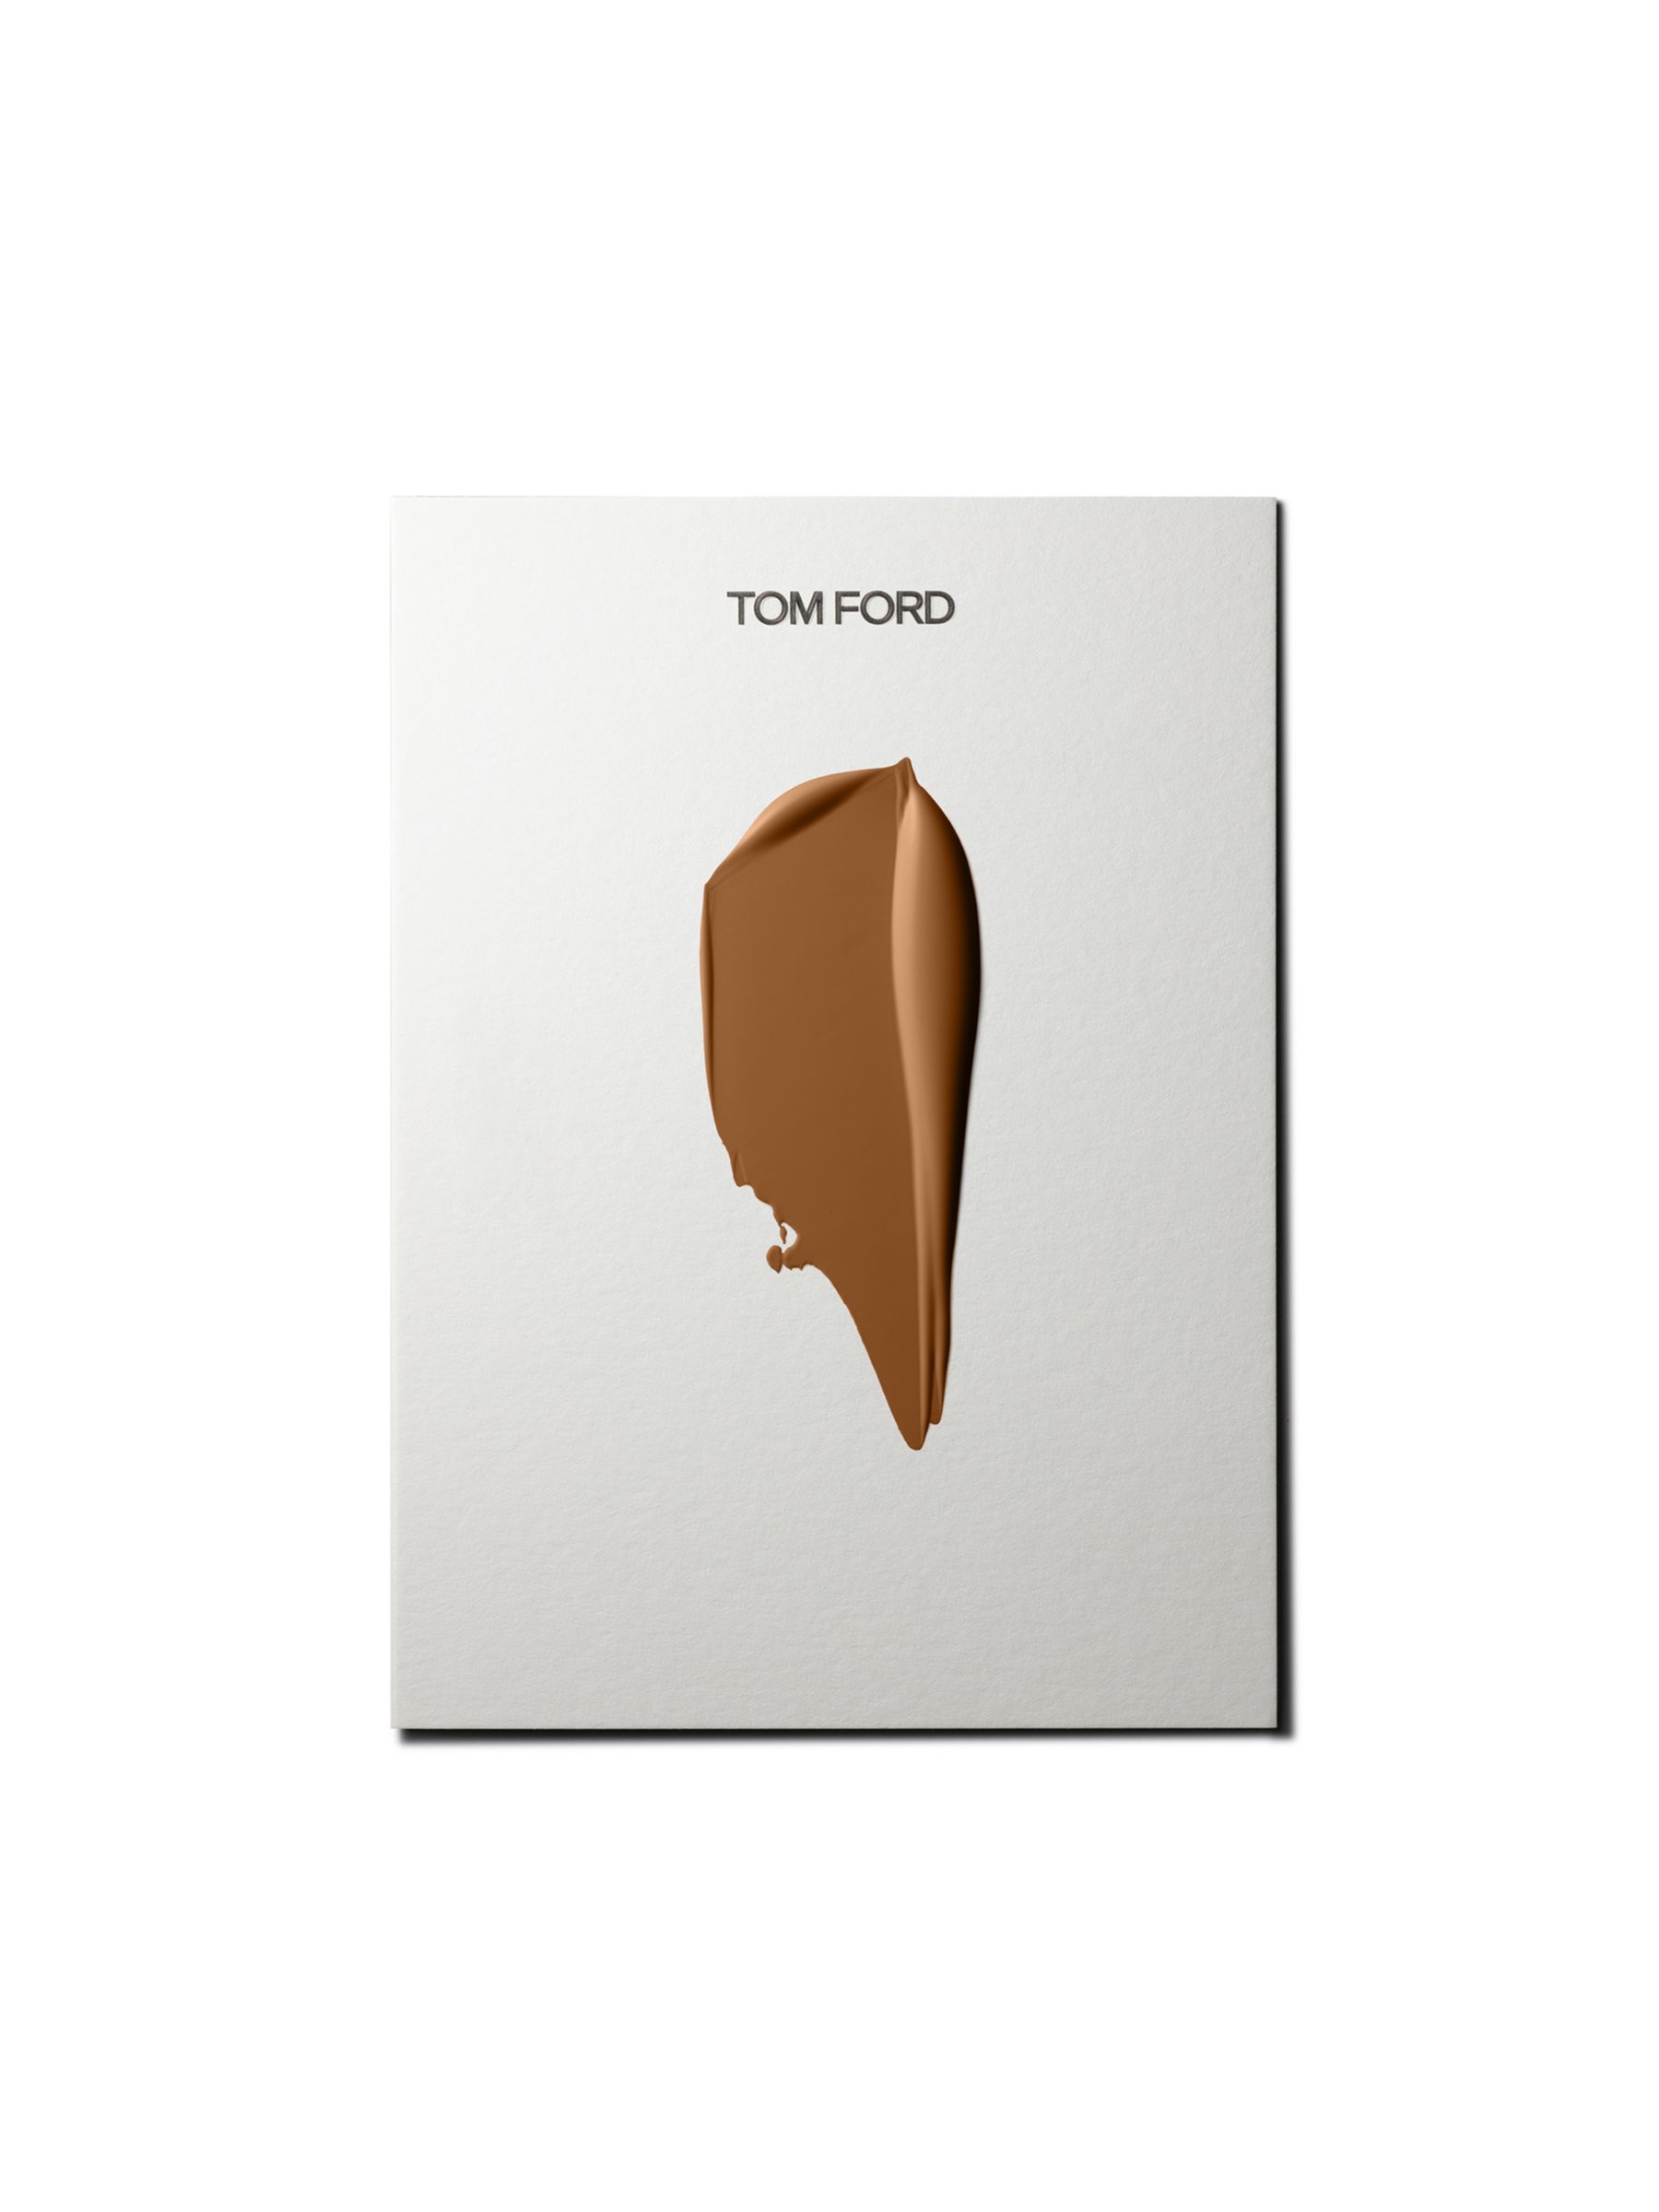 TOM FORD Traceless Soft Matte Foundation,  Warm Almond at John Lewis &  Partners